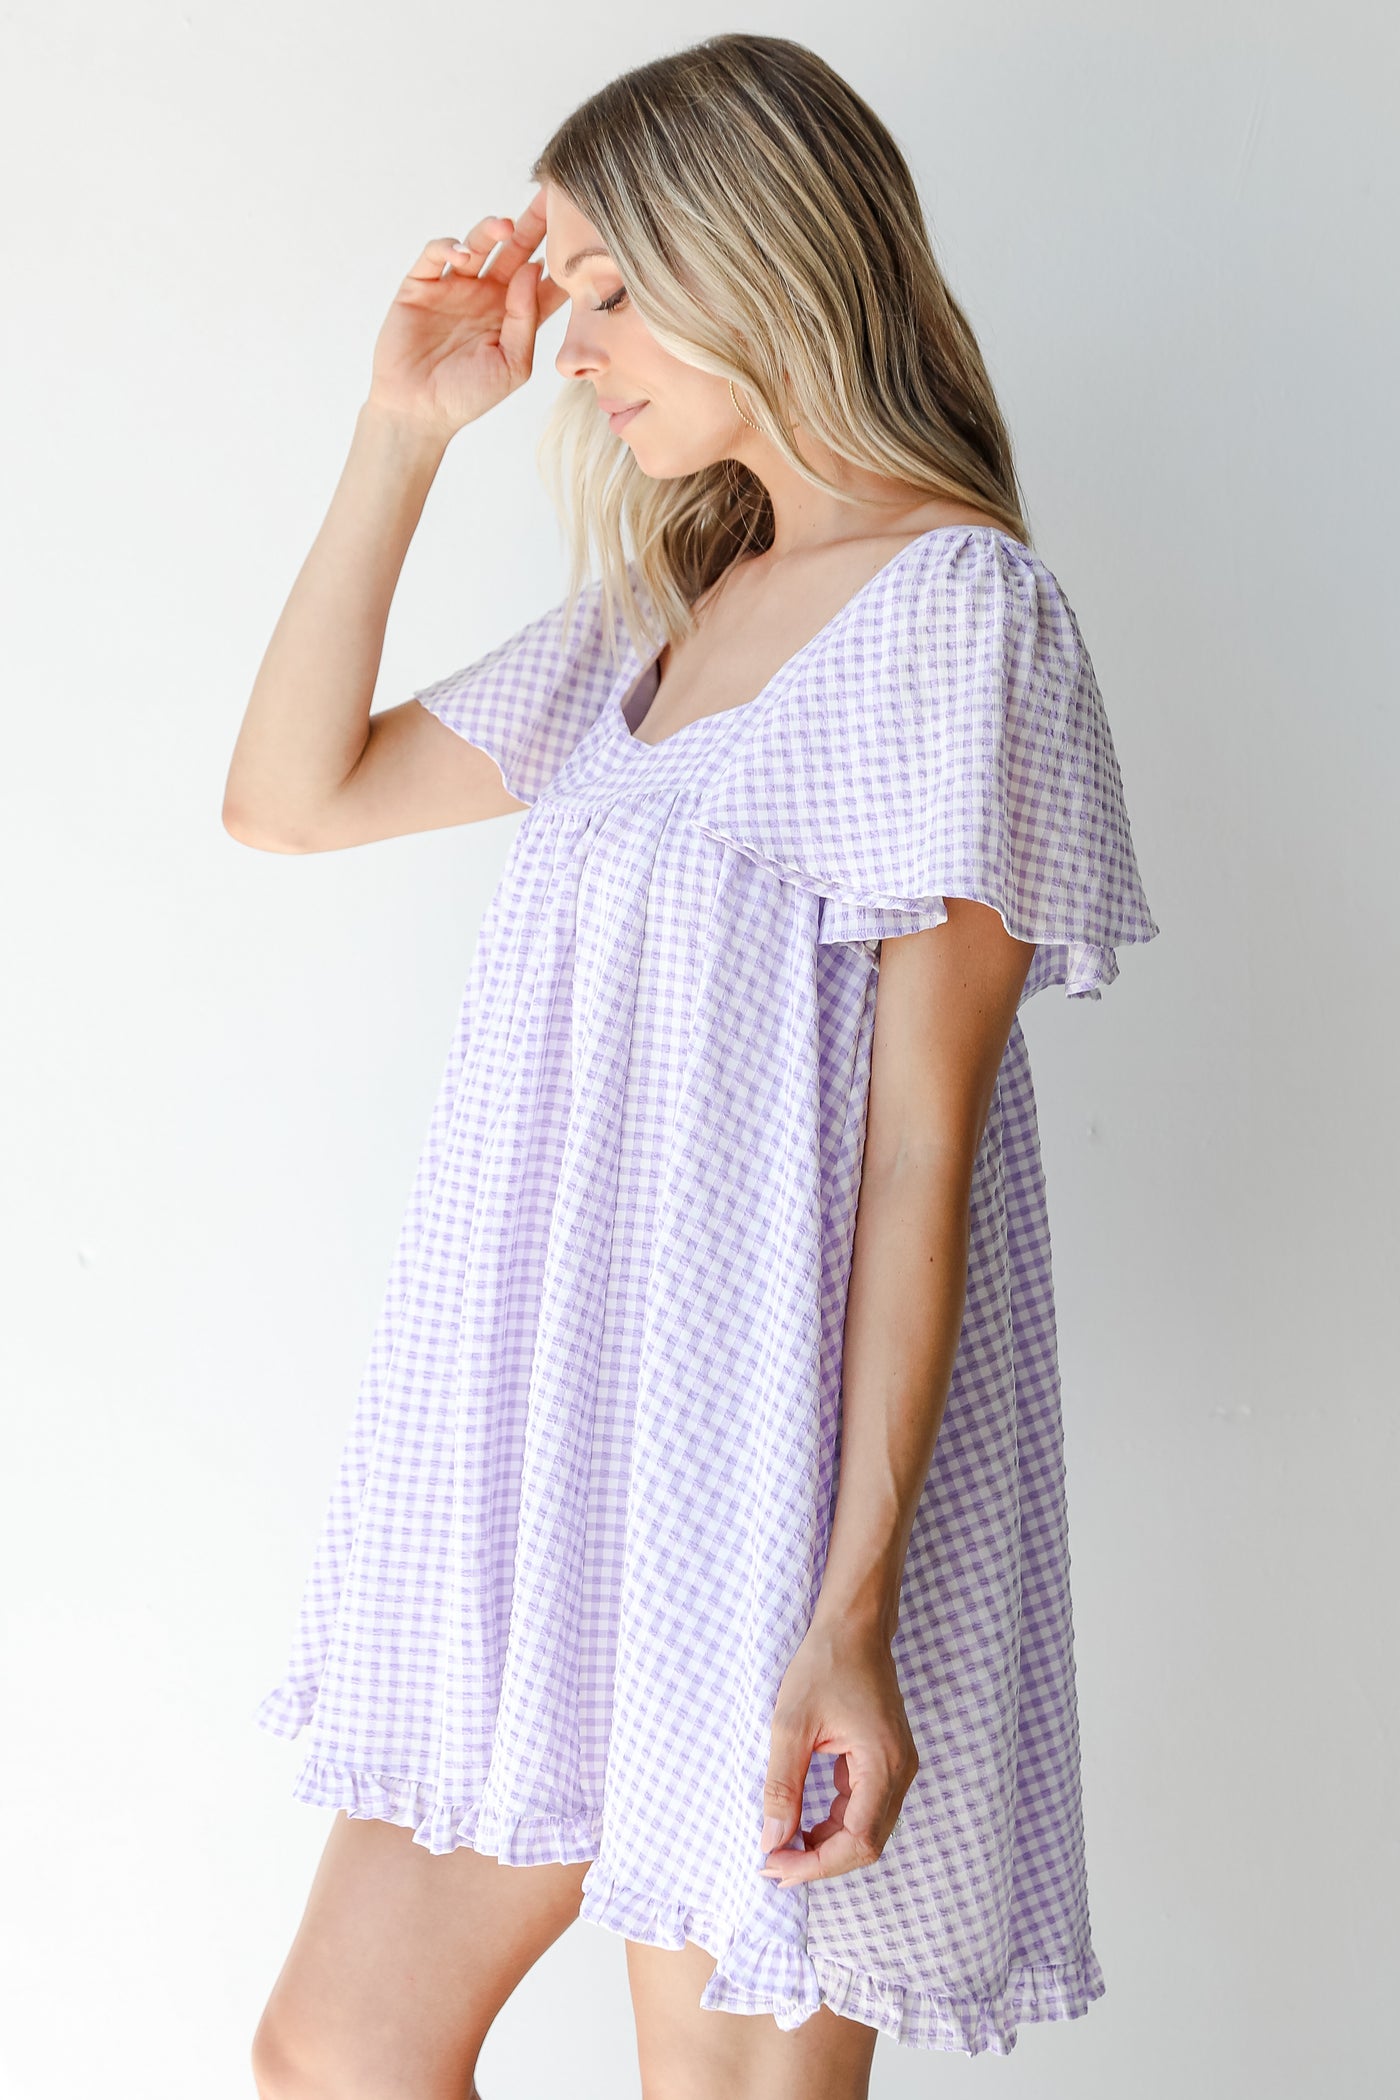 Gingham Mini Dress in lavender side view